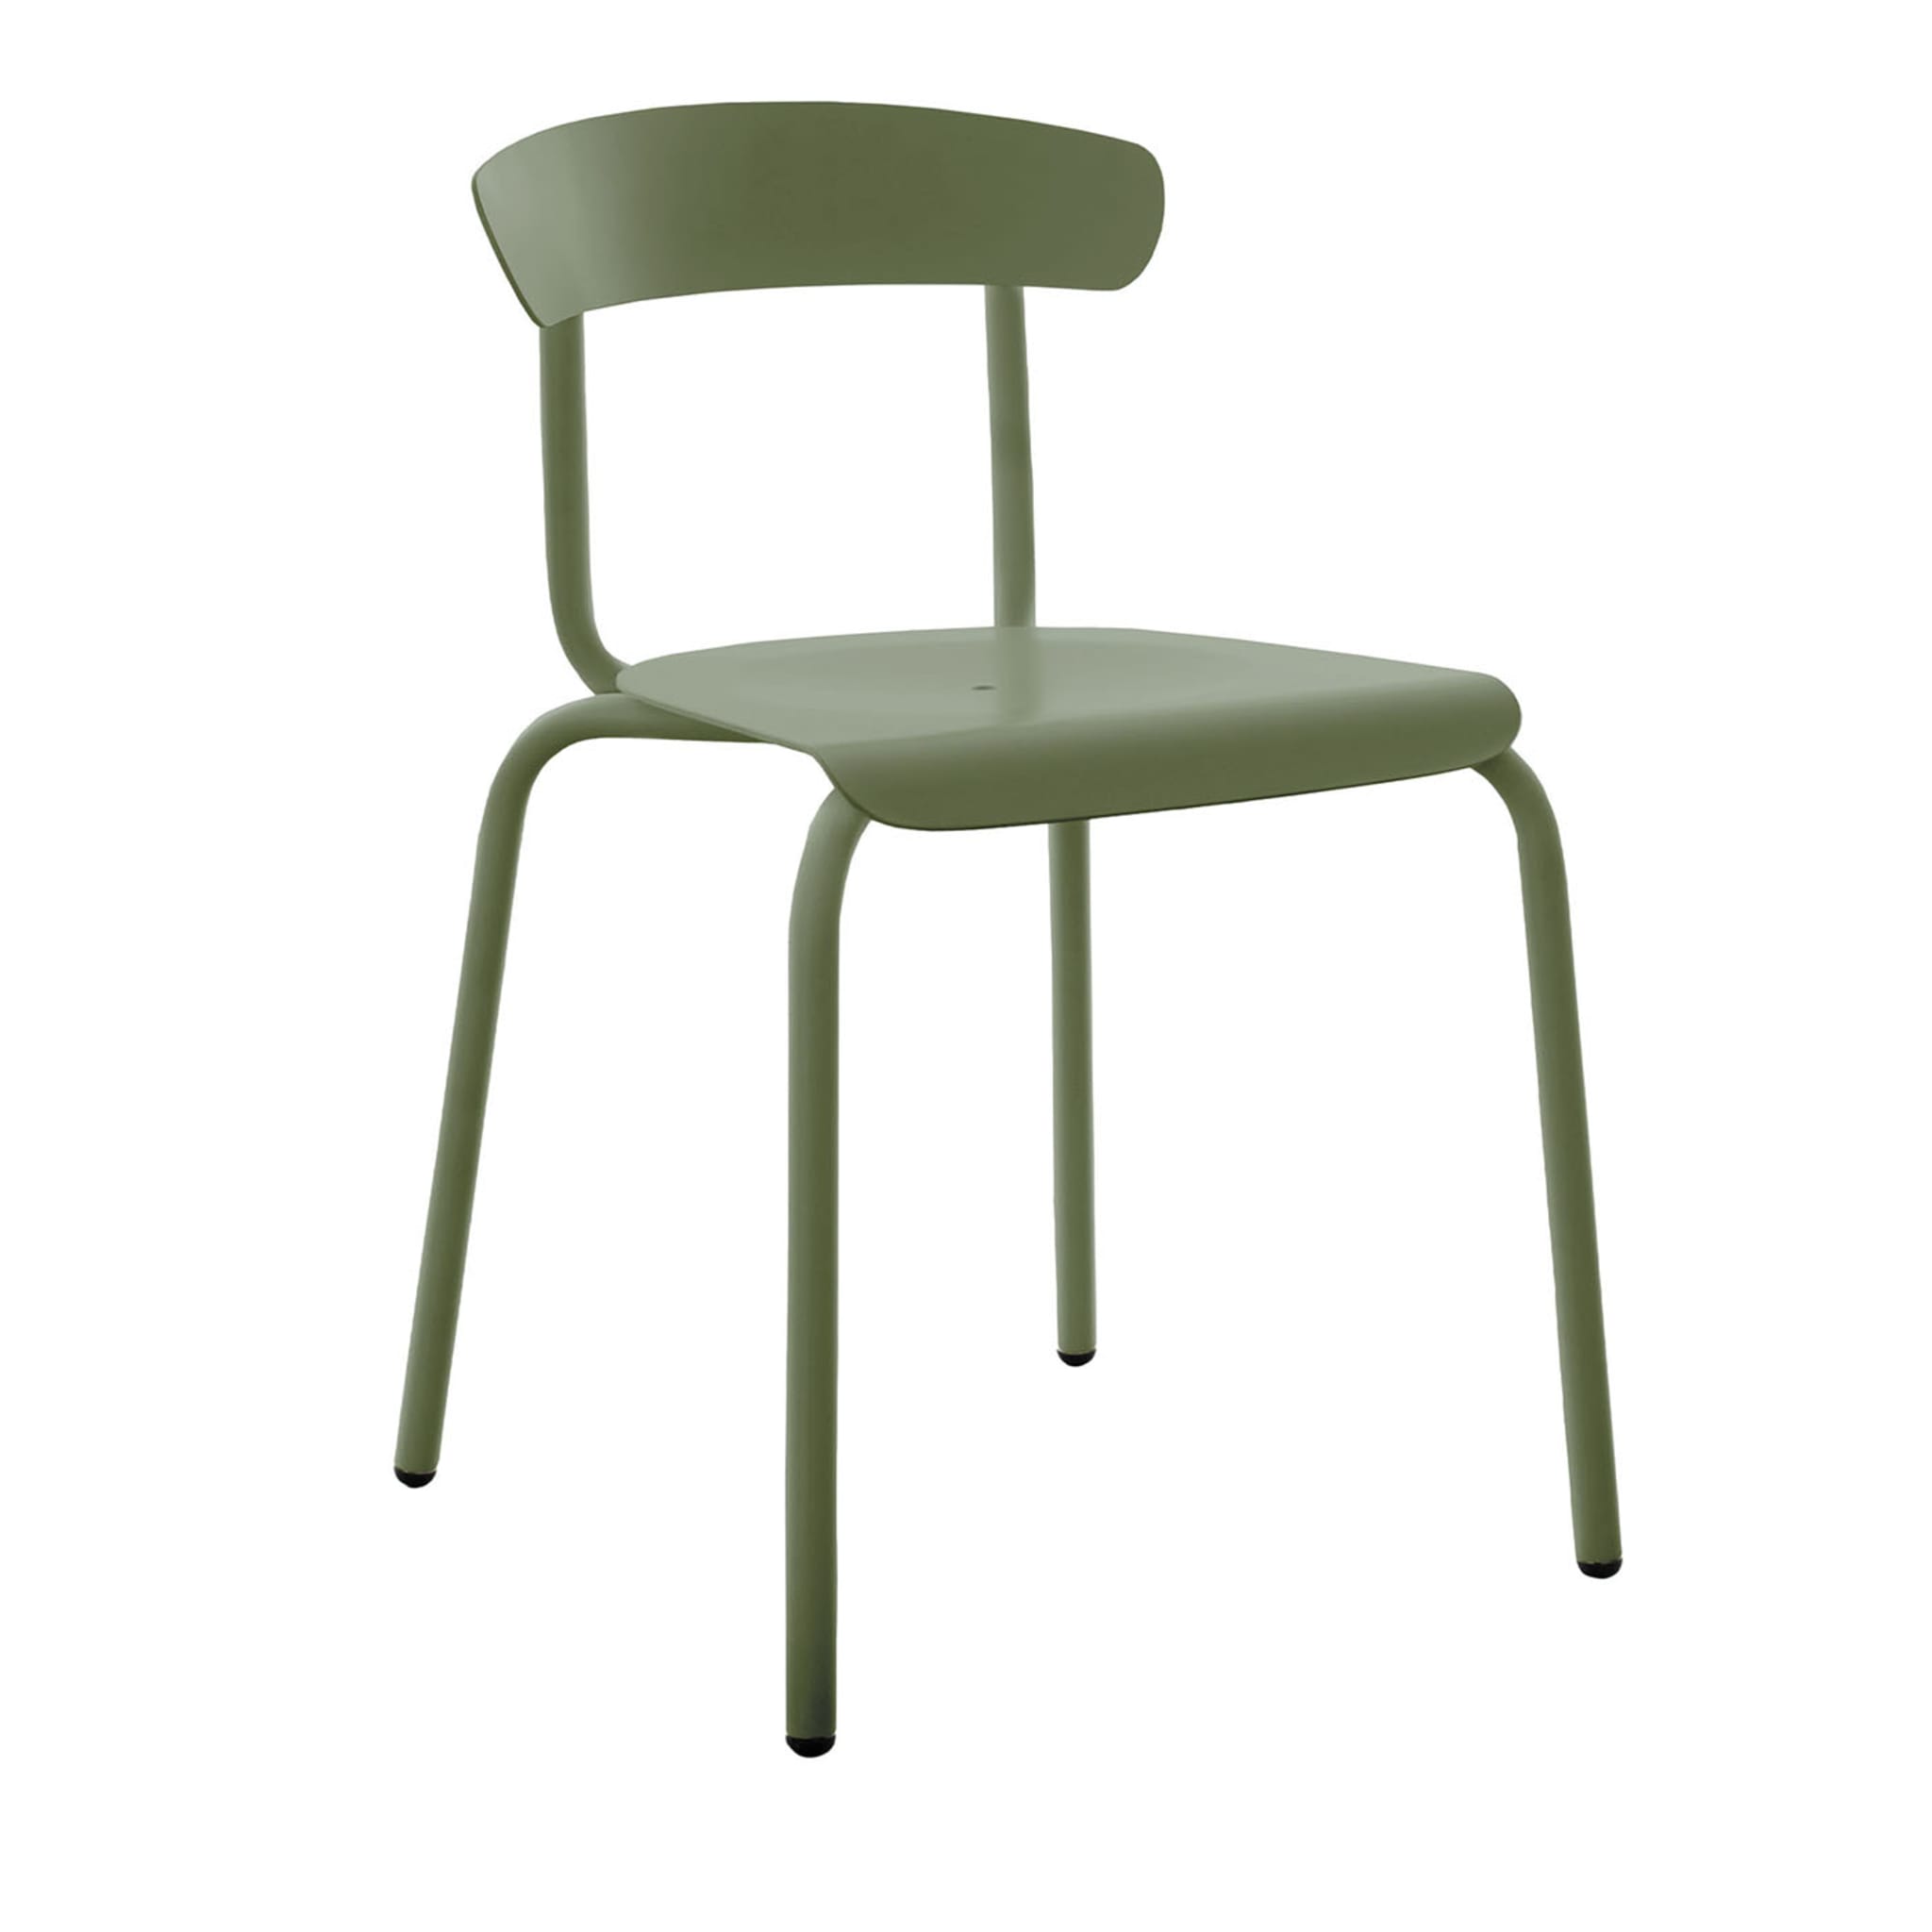 Olive Green AluMito Chair with Armrests by Pascal Bosetti - Main view